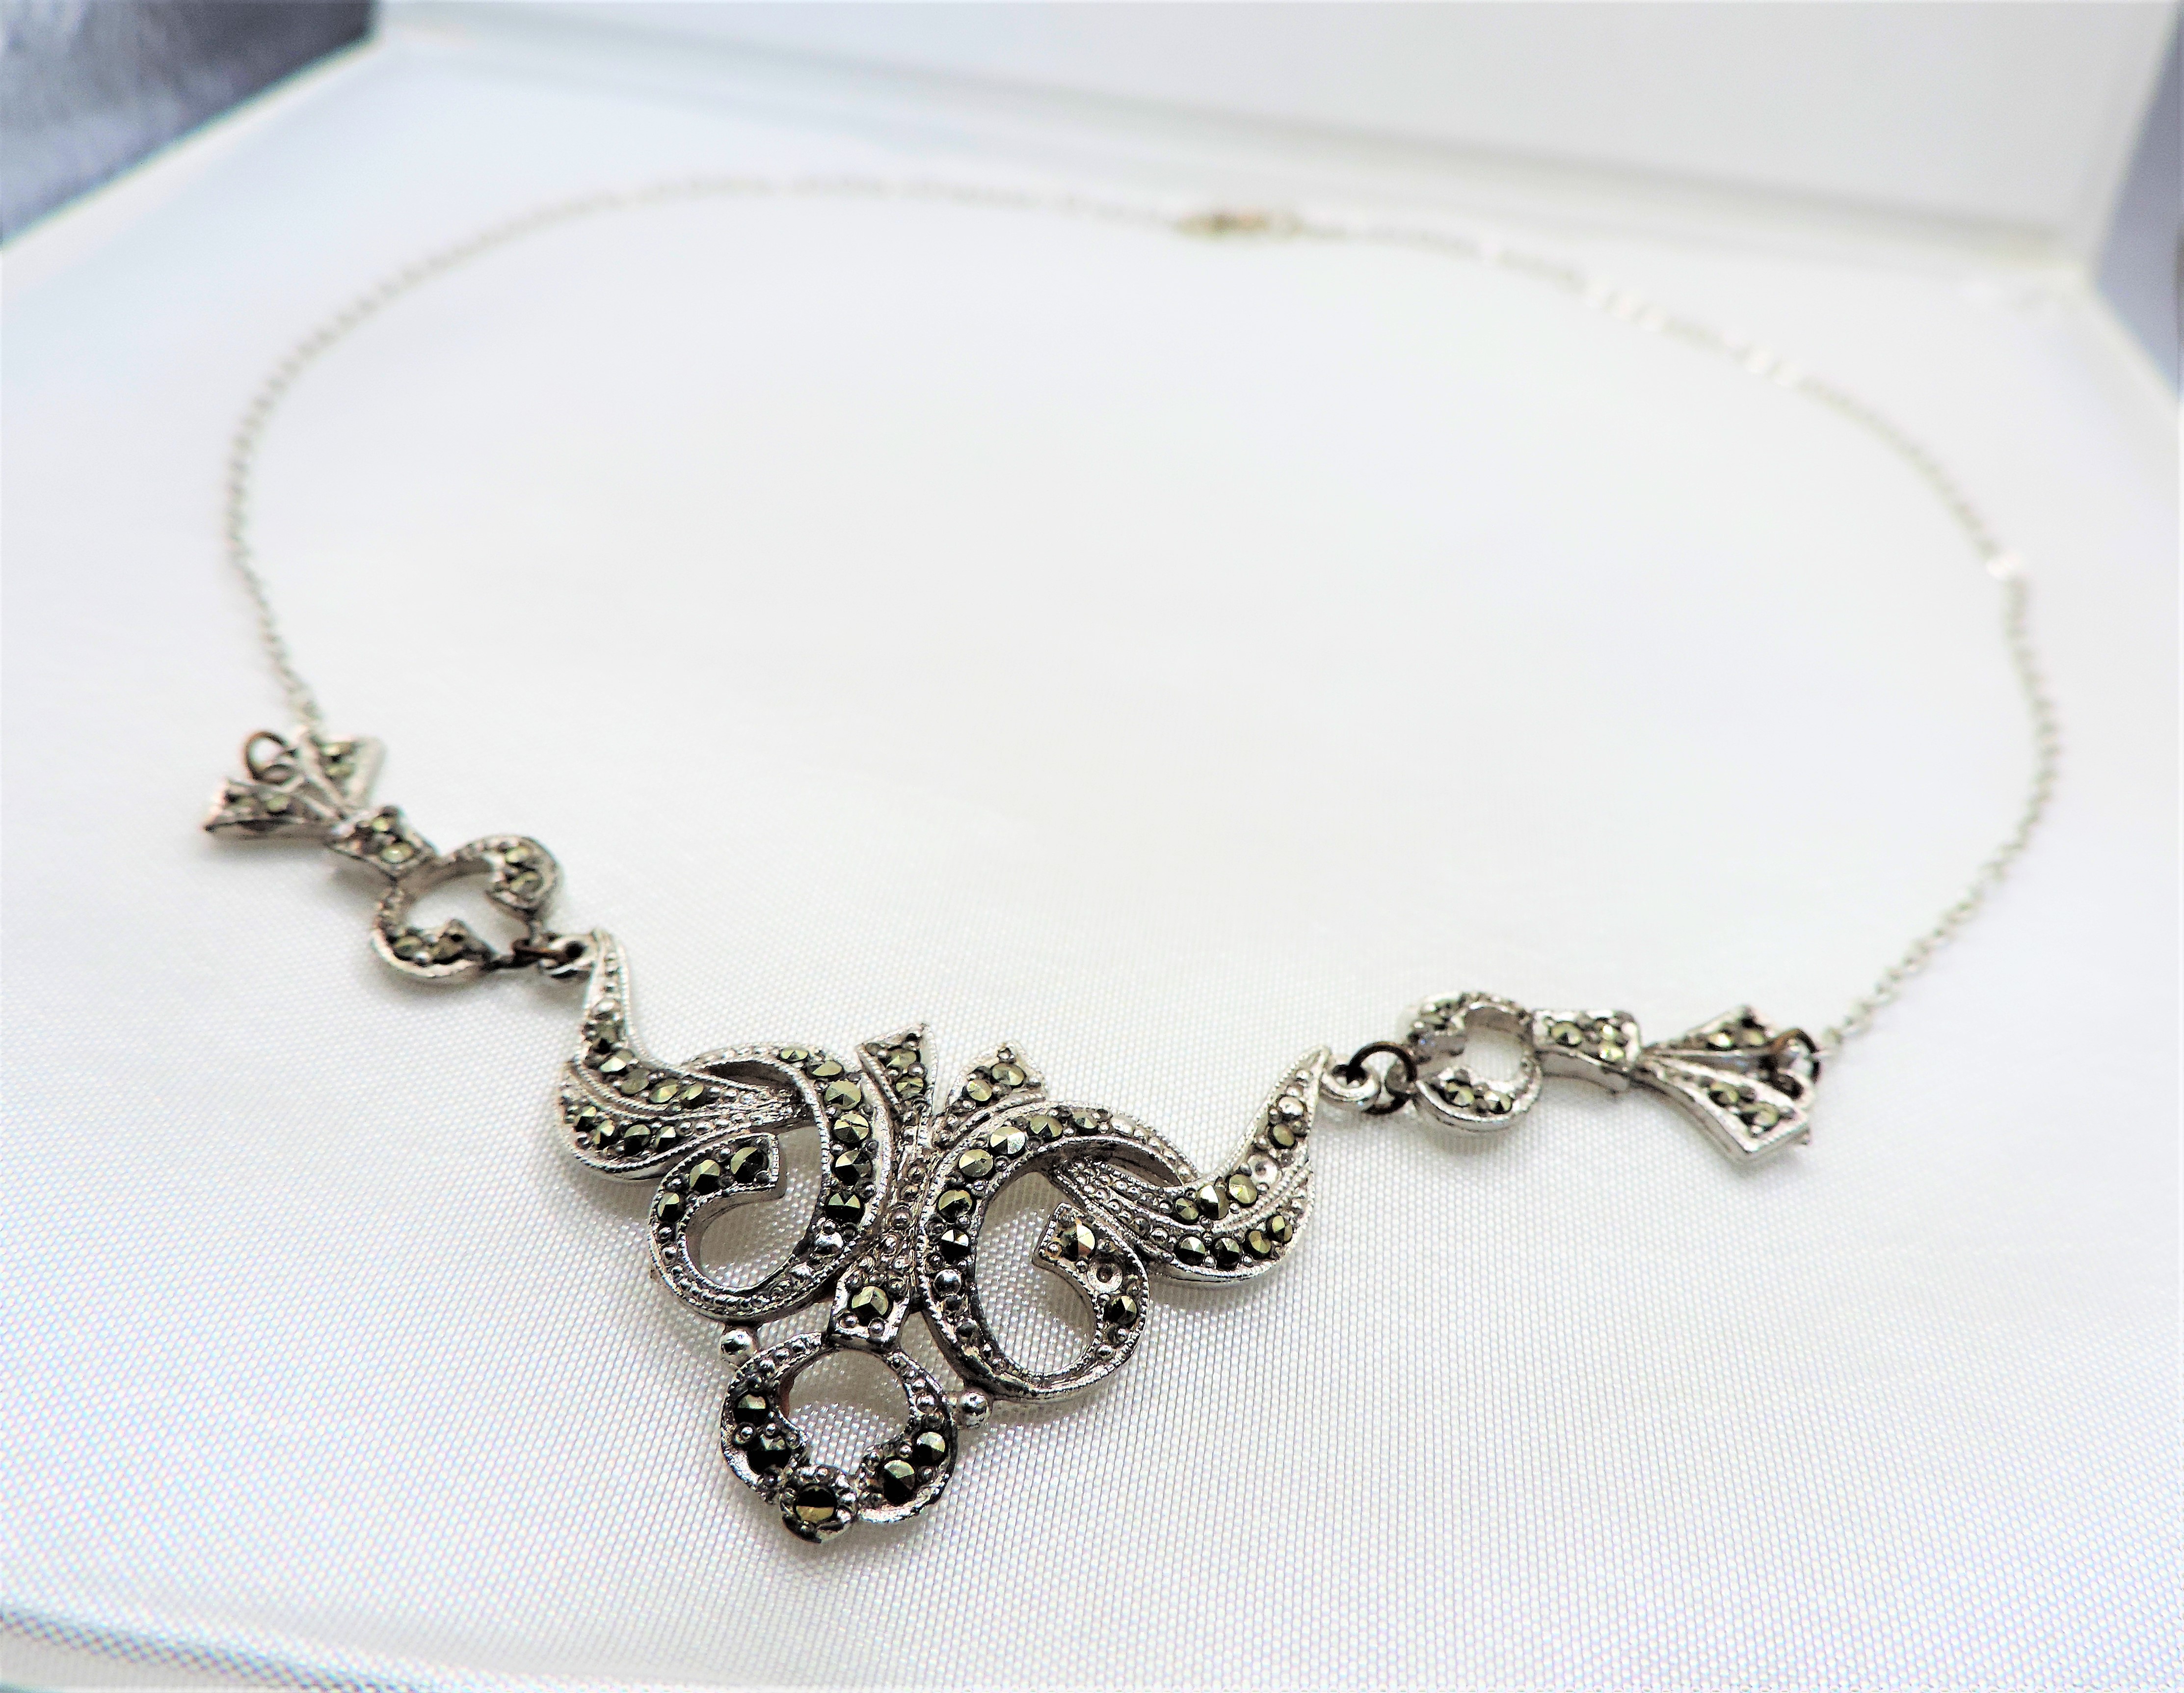 Vintage Silver Marcasite Necklace with Gift Pouch c. 1950's